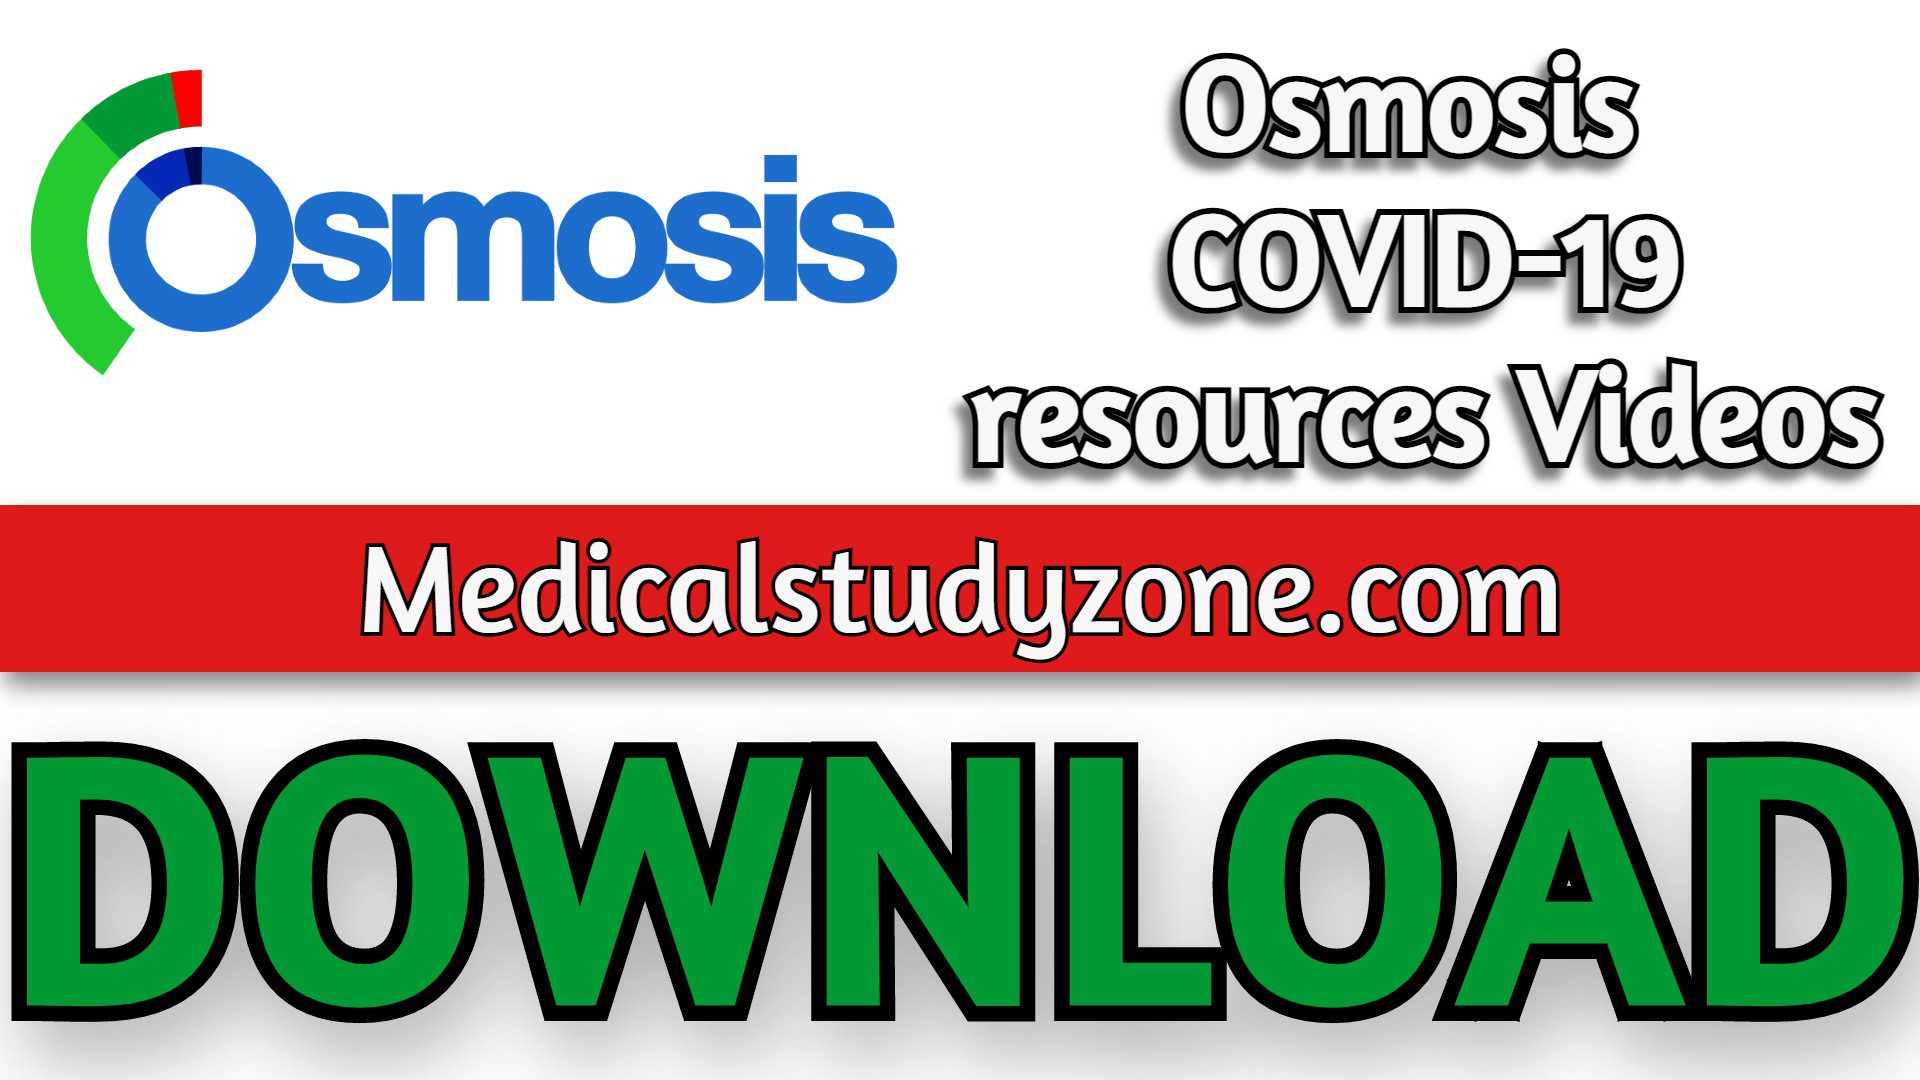 Osmosis COVID-19 resources Videos 2022 Free Download